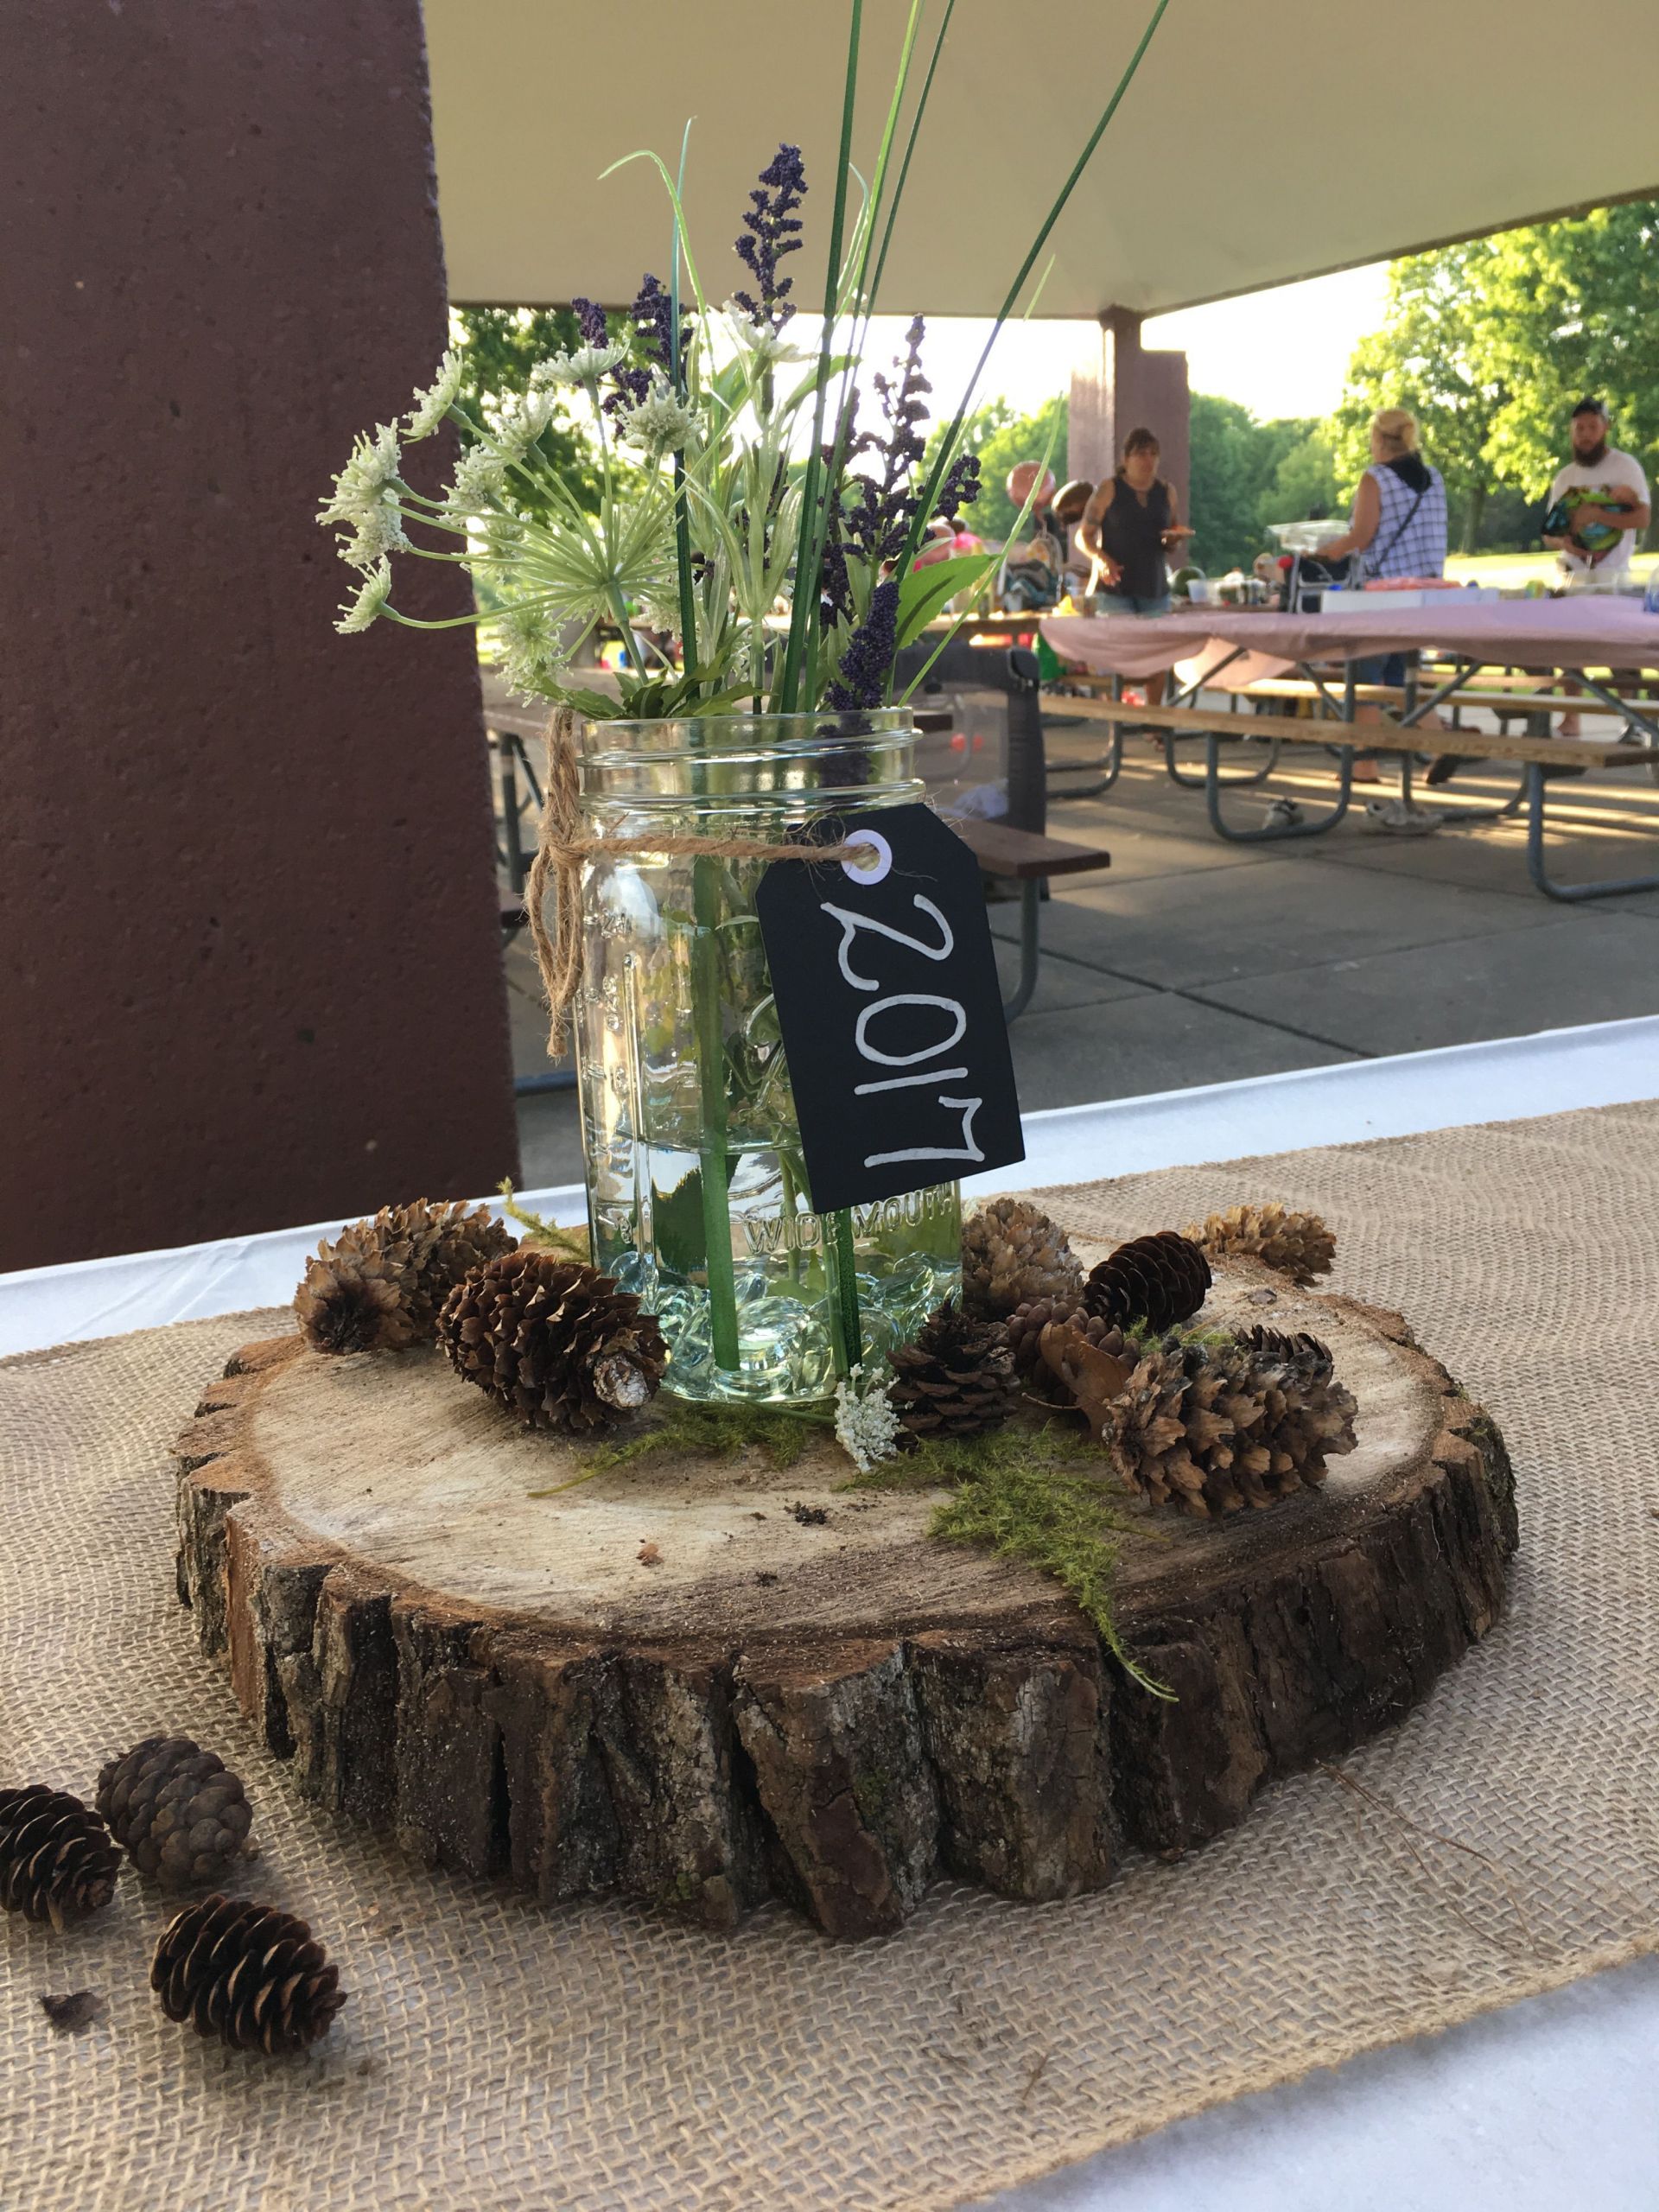 Chic Simple Backyard Graduation Party Decorating Ideas
 Woodsy Rustic graduation party